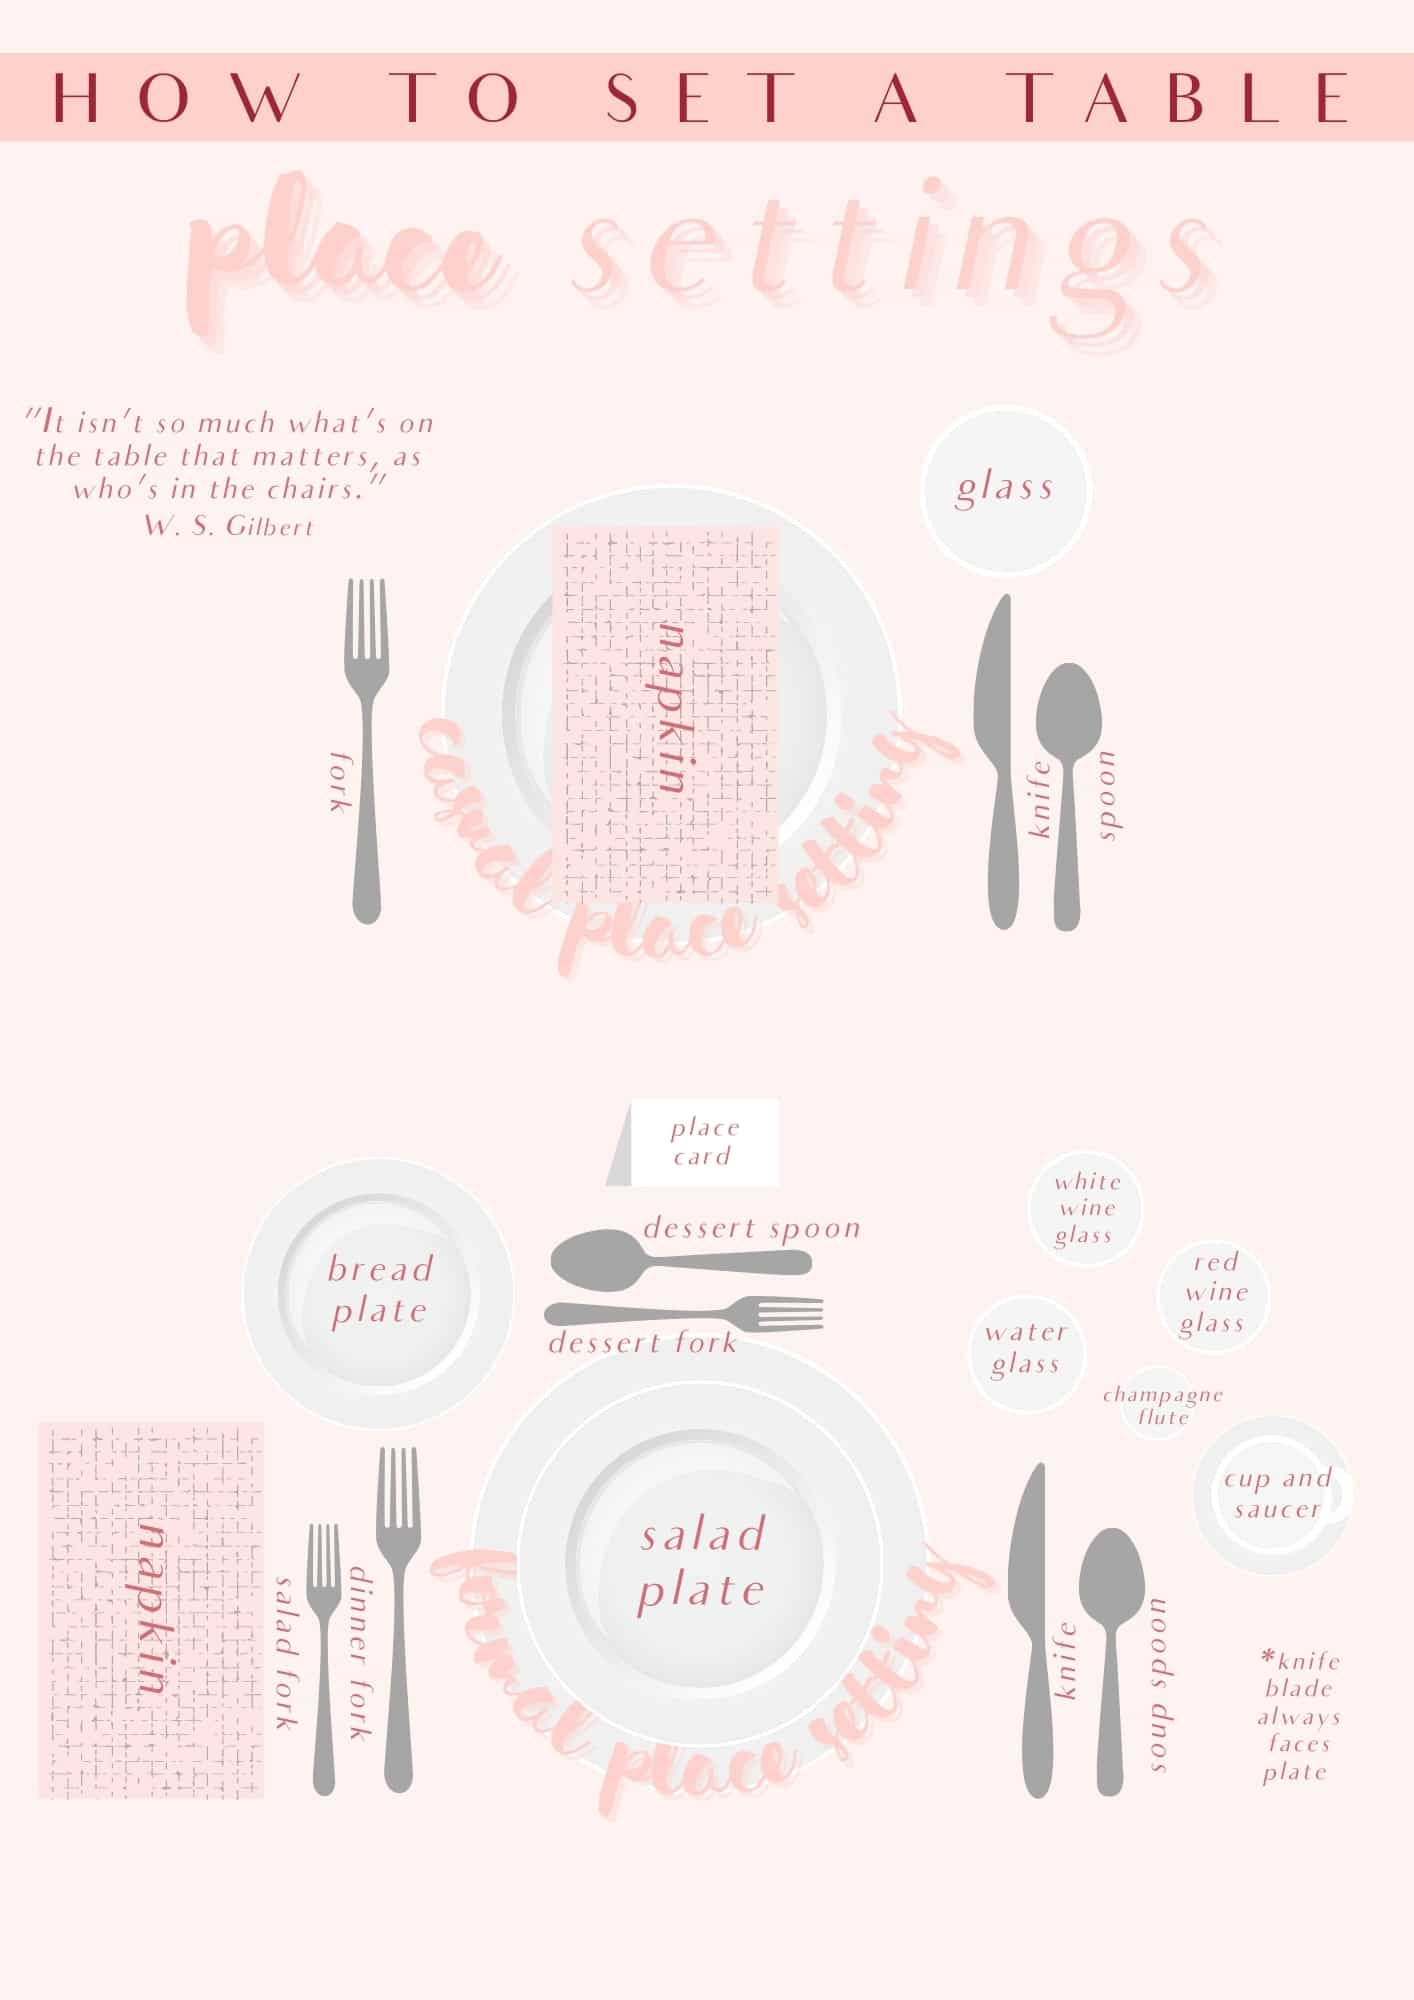 how to set a table infographic